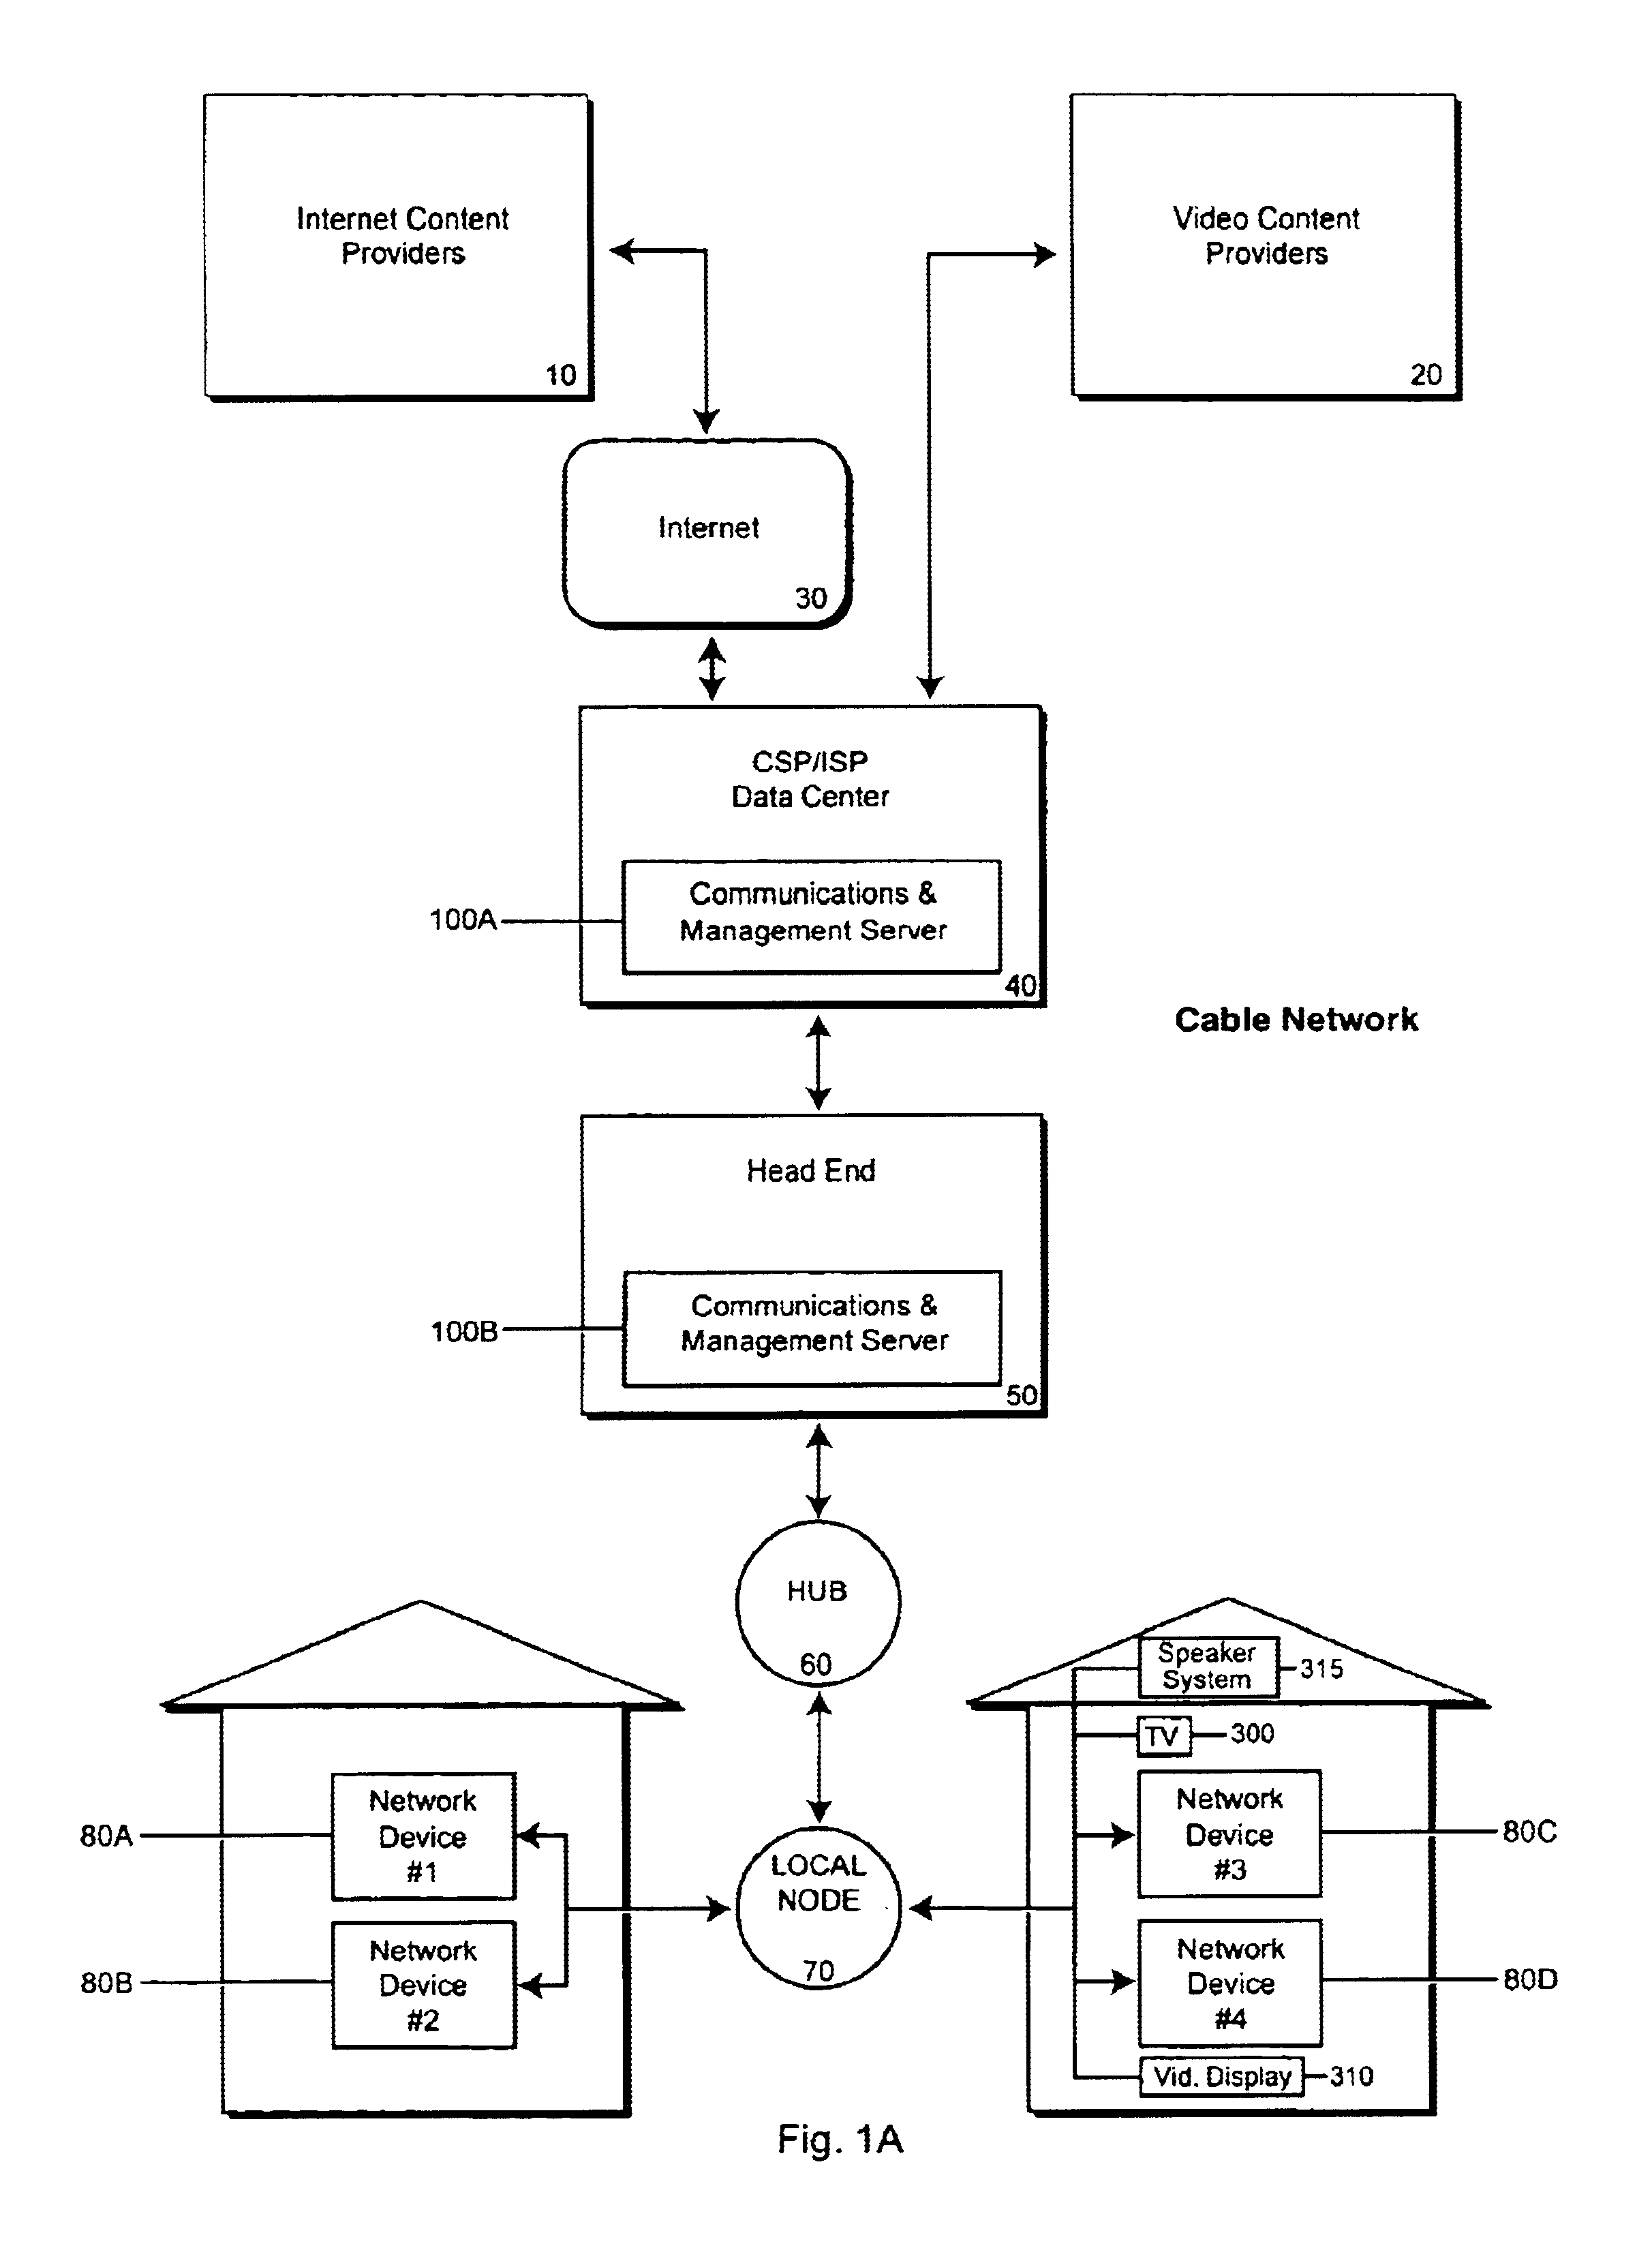 Method and system for content deployment and activation